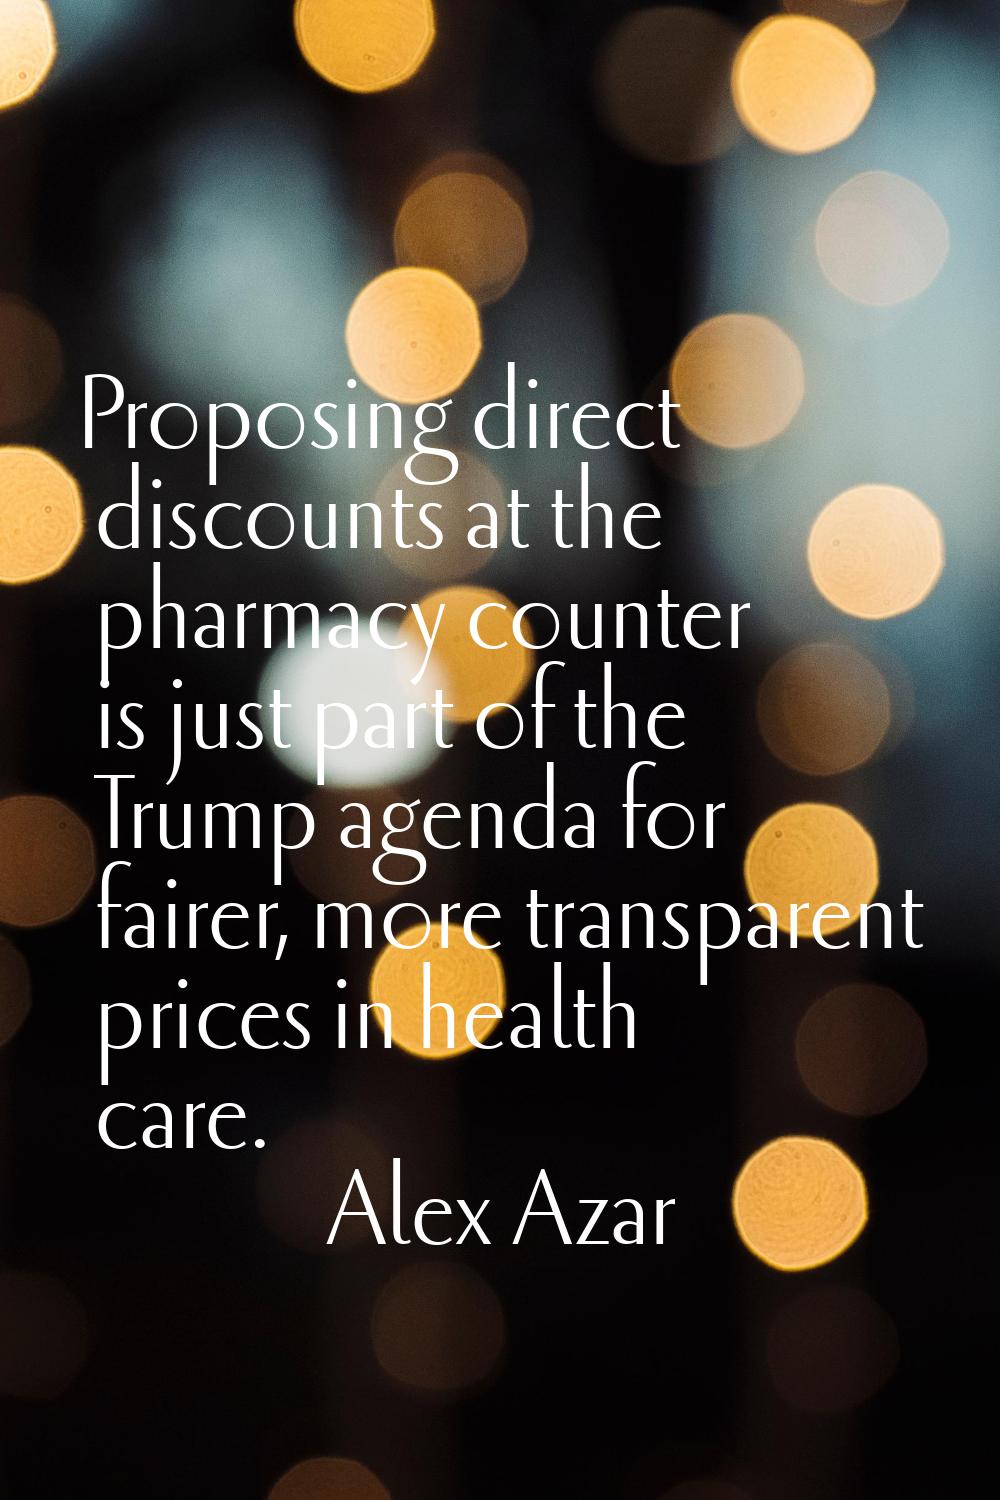 Proposing direct discounts at the pharmacy counter is just part of the Trump agenda for fairer, mor